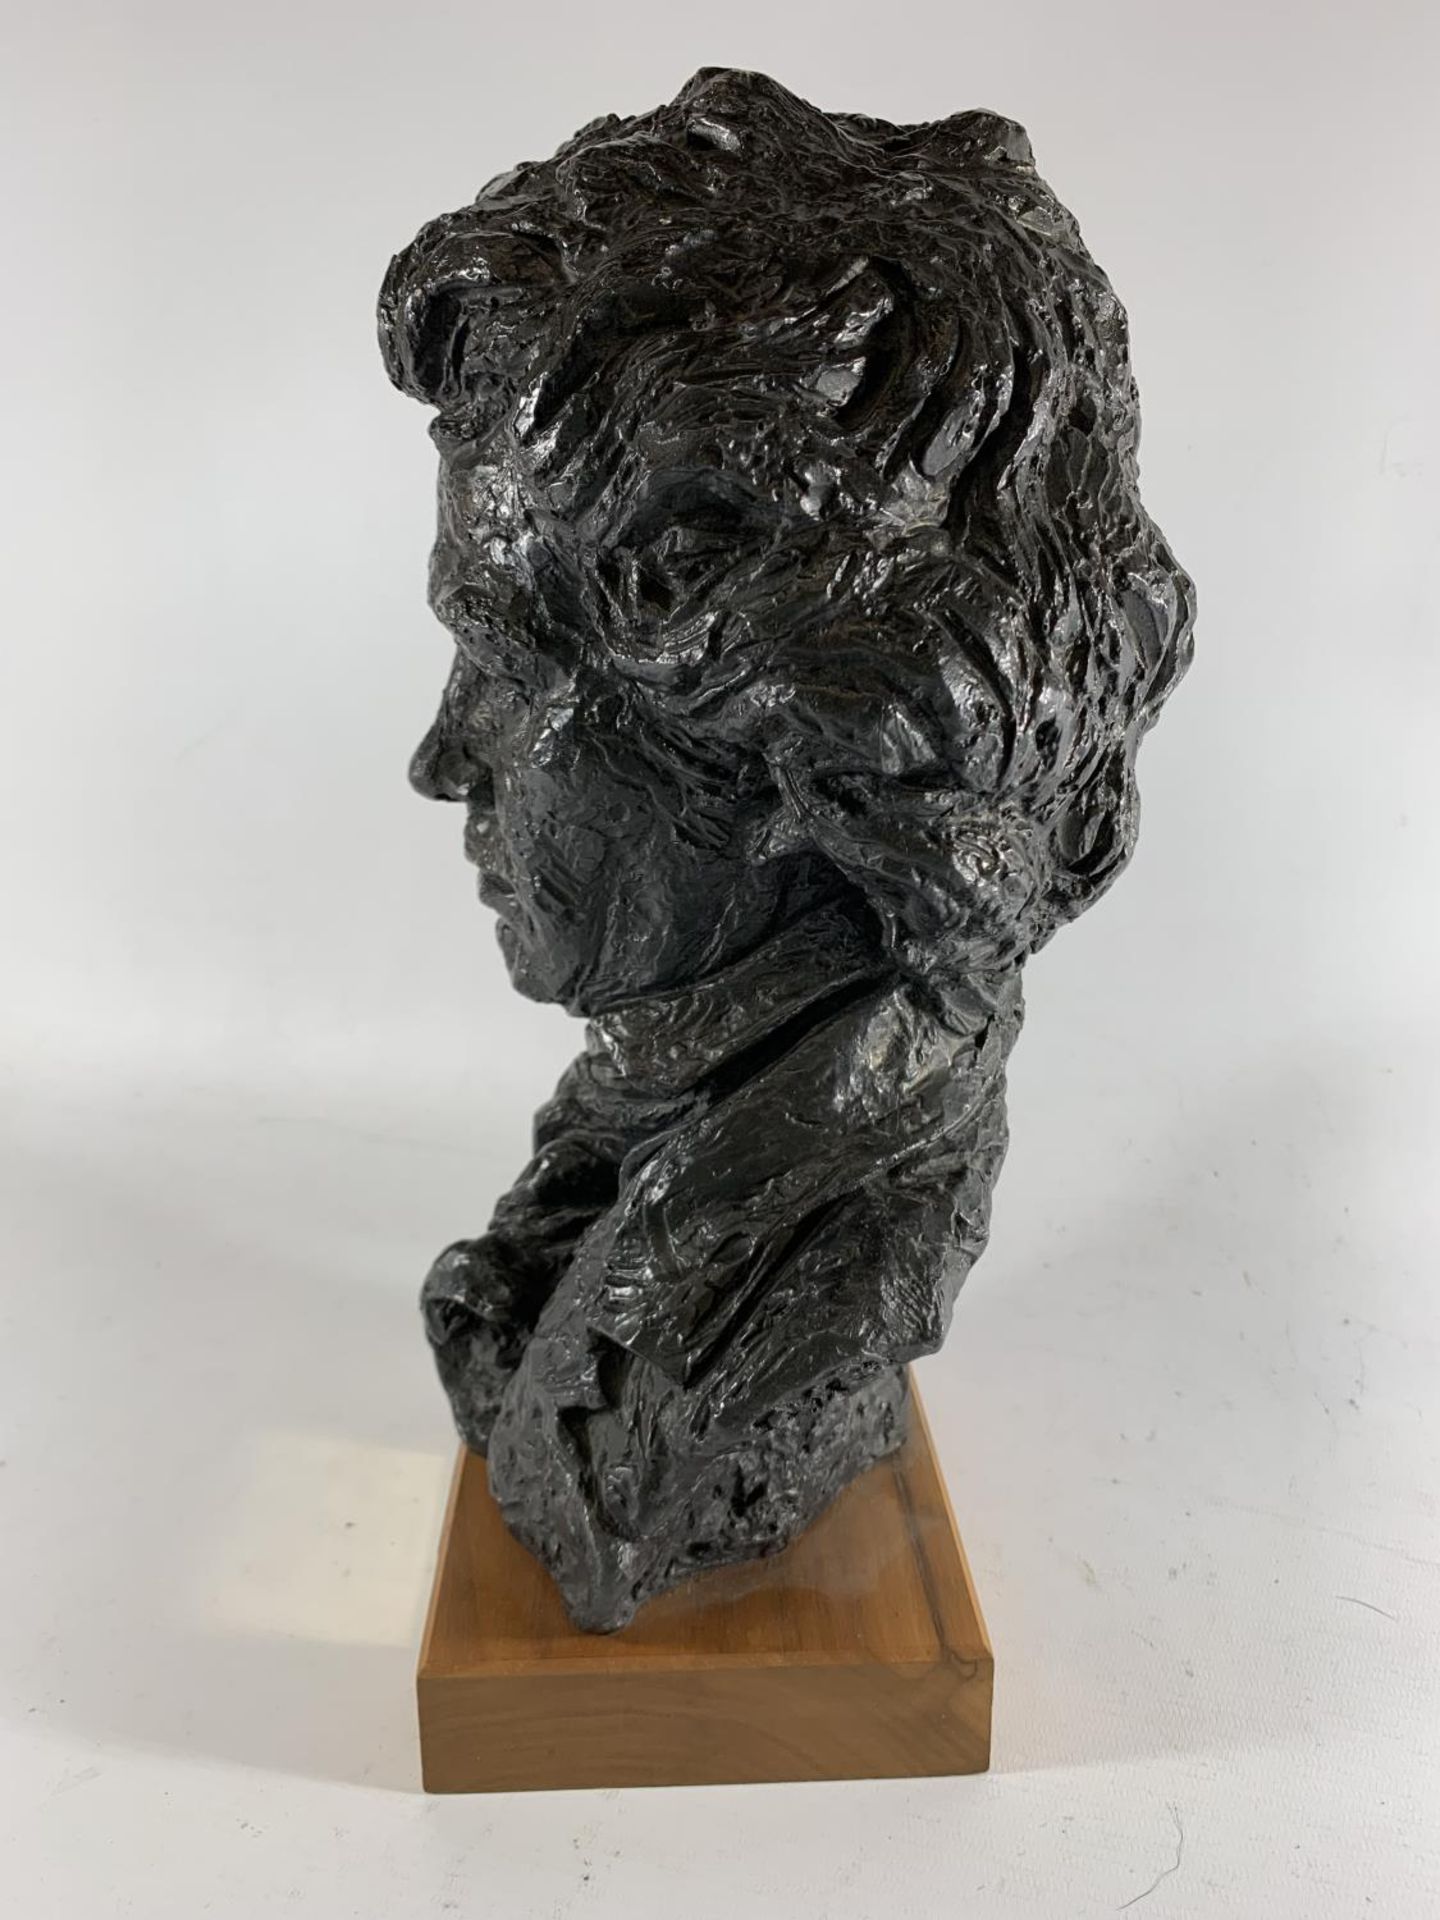 * A PRESENTATION PAINTED PLASTER BUST OF LUDWIG VAN BEETHOVEN, MOUNTED ON WOODEN BASE, HEIGHT 35. - Image 3 of 5